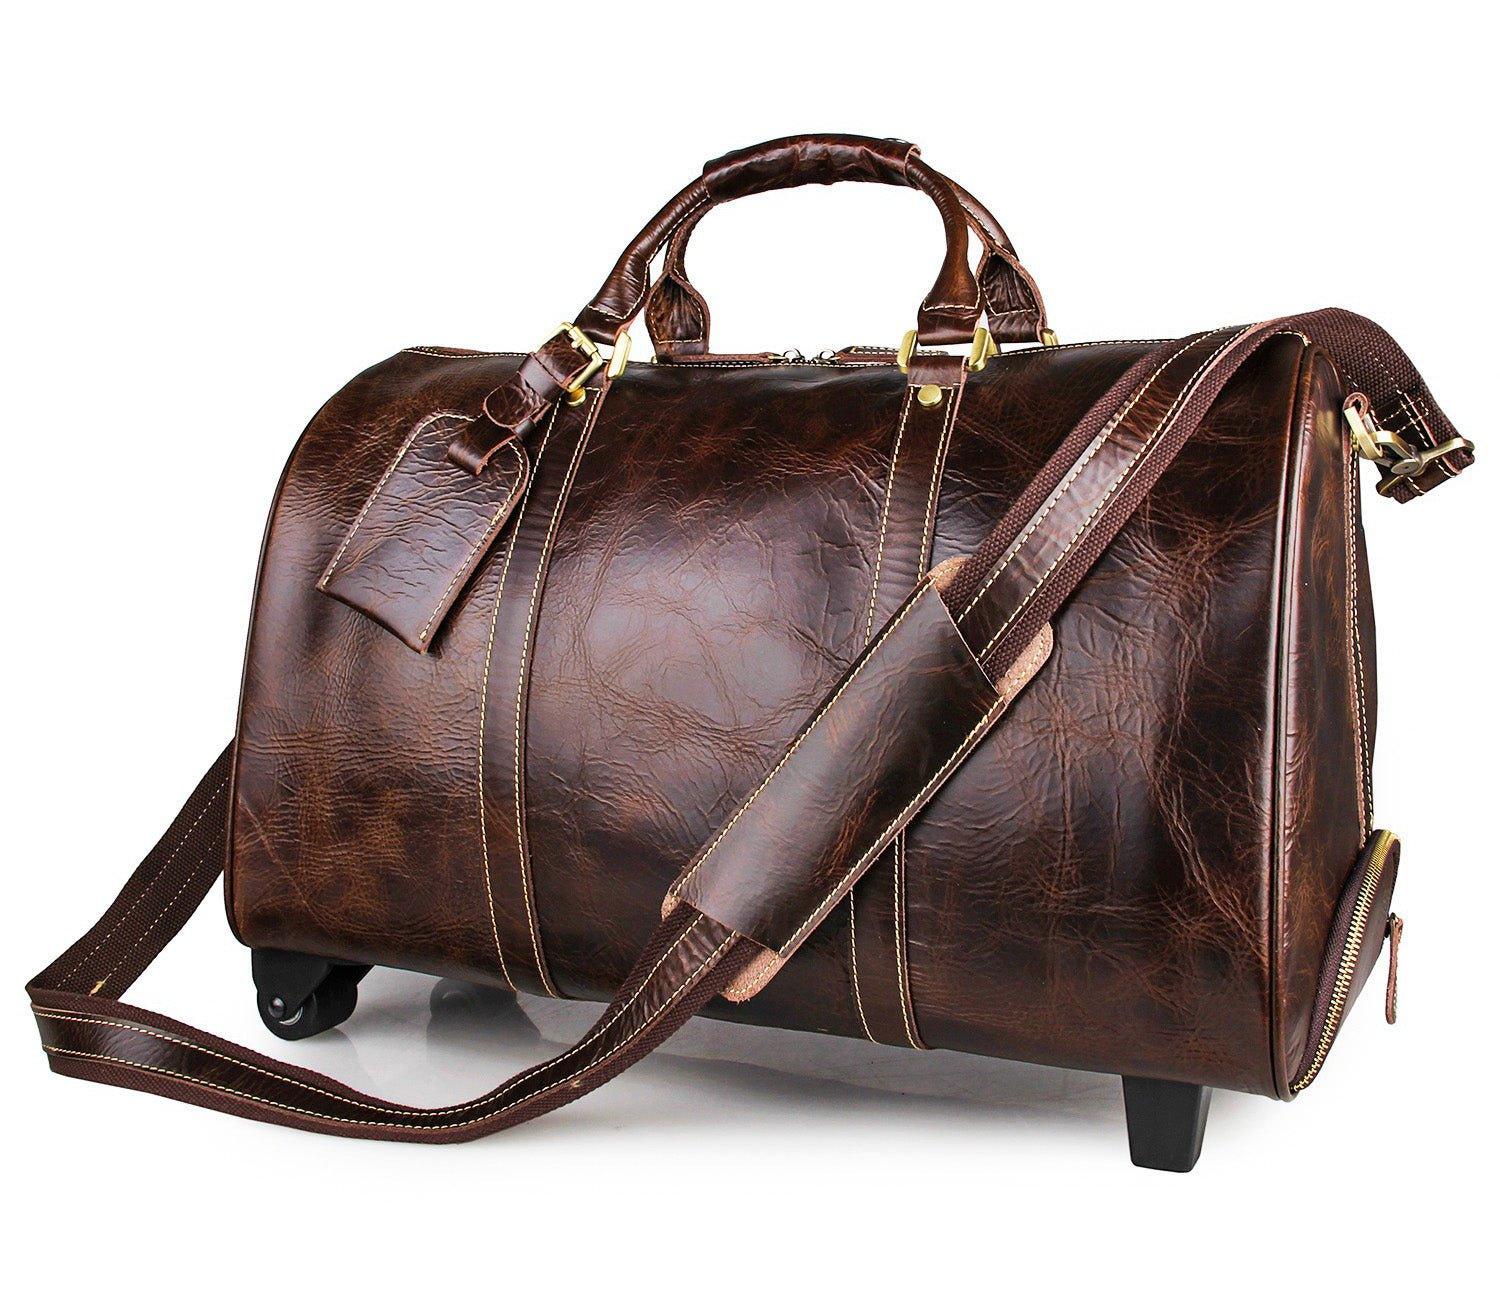 20 Wheeled Duffel Bag in Canvas with Colombian Leather